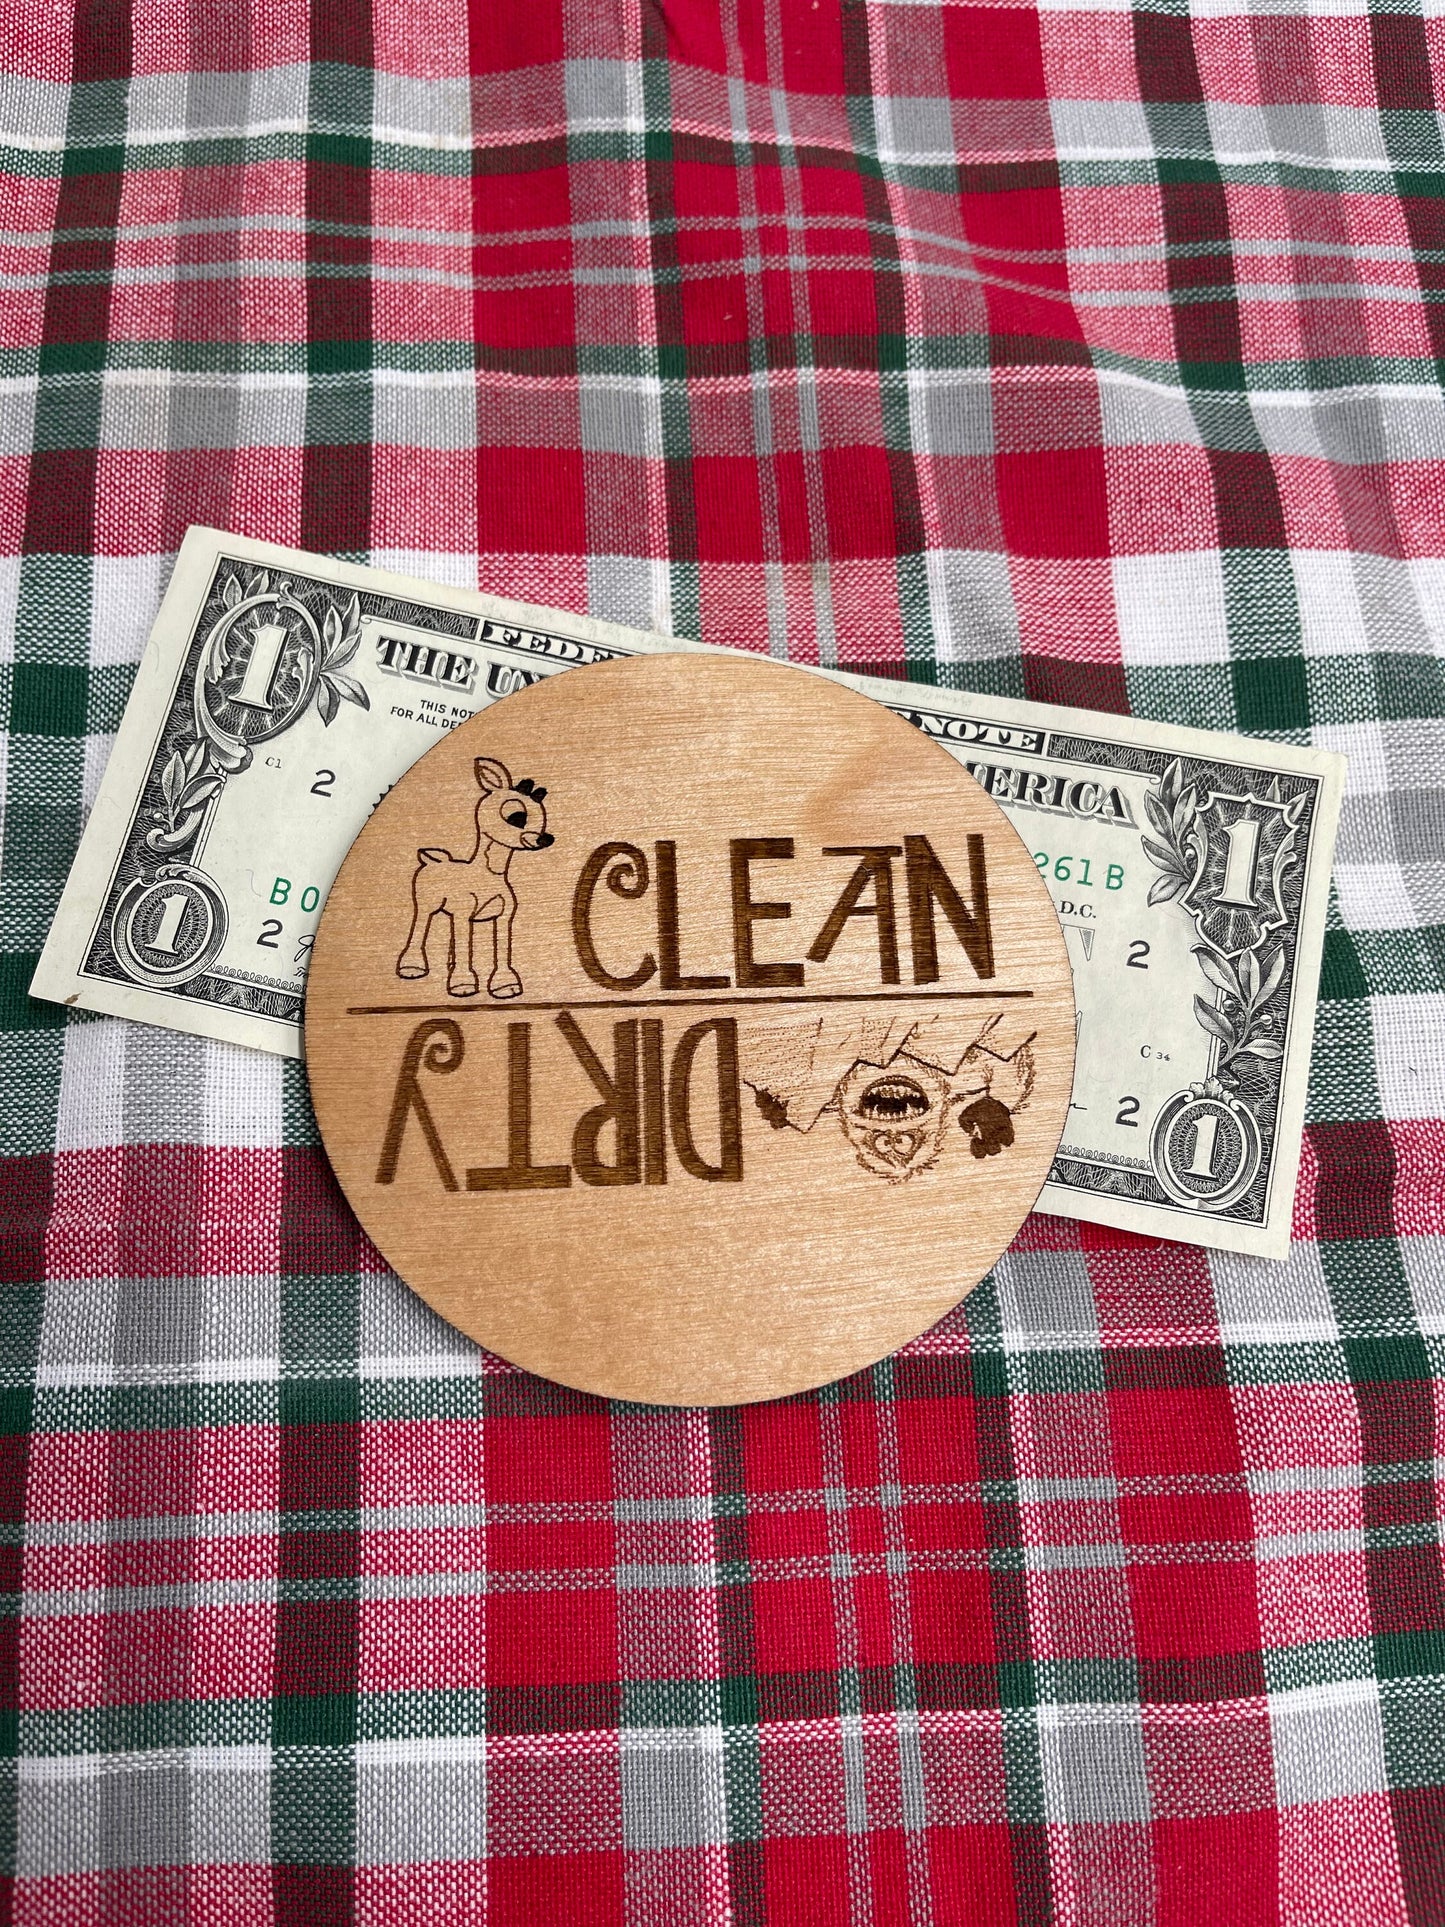 CHRISTMAS DISHWASHER MAGNET - Rudolph the Red Nose Reindeer & Bumble - Holiday Clean Dirty Wood Magnet